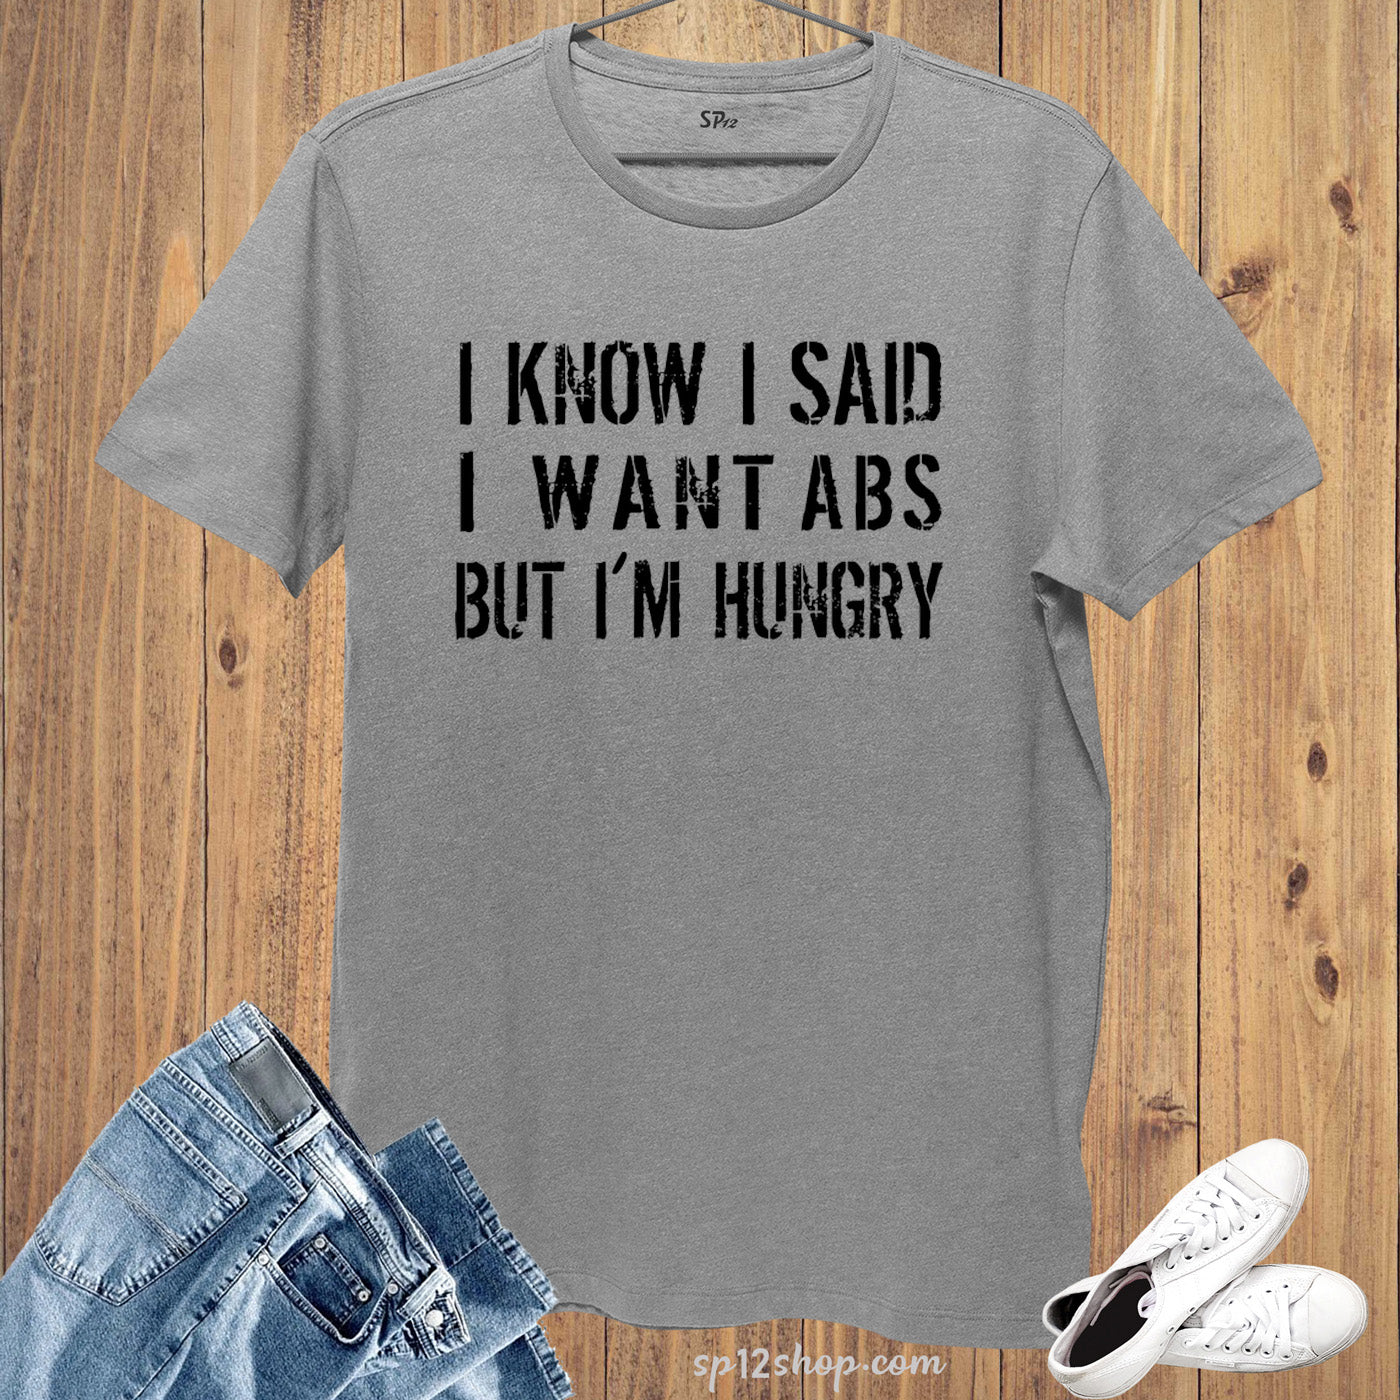 i-know-i-said-i-want-abs-but-im-hungry-slogan-t-shirt